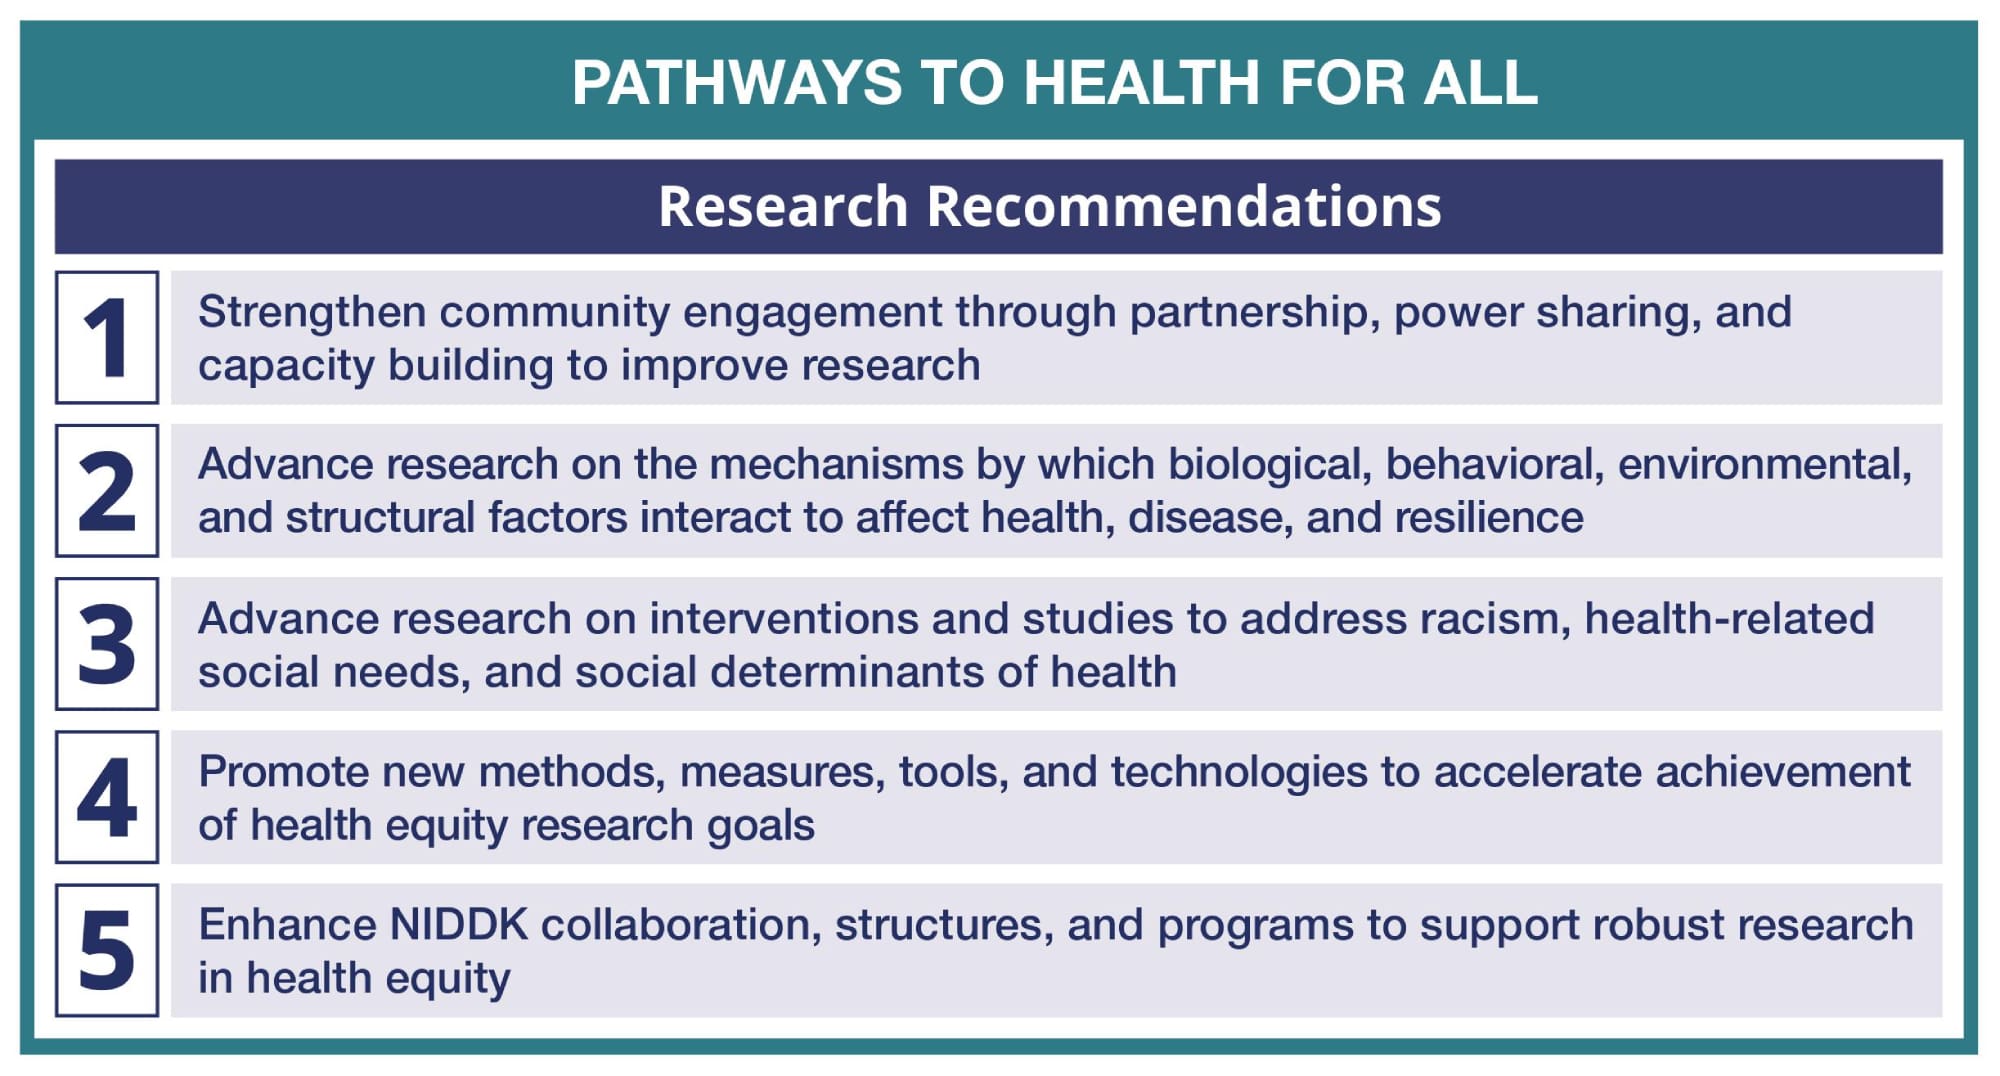 “Pathways to Health for All” research recommendations